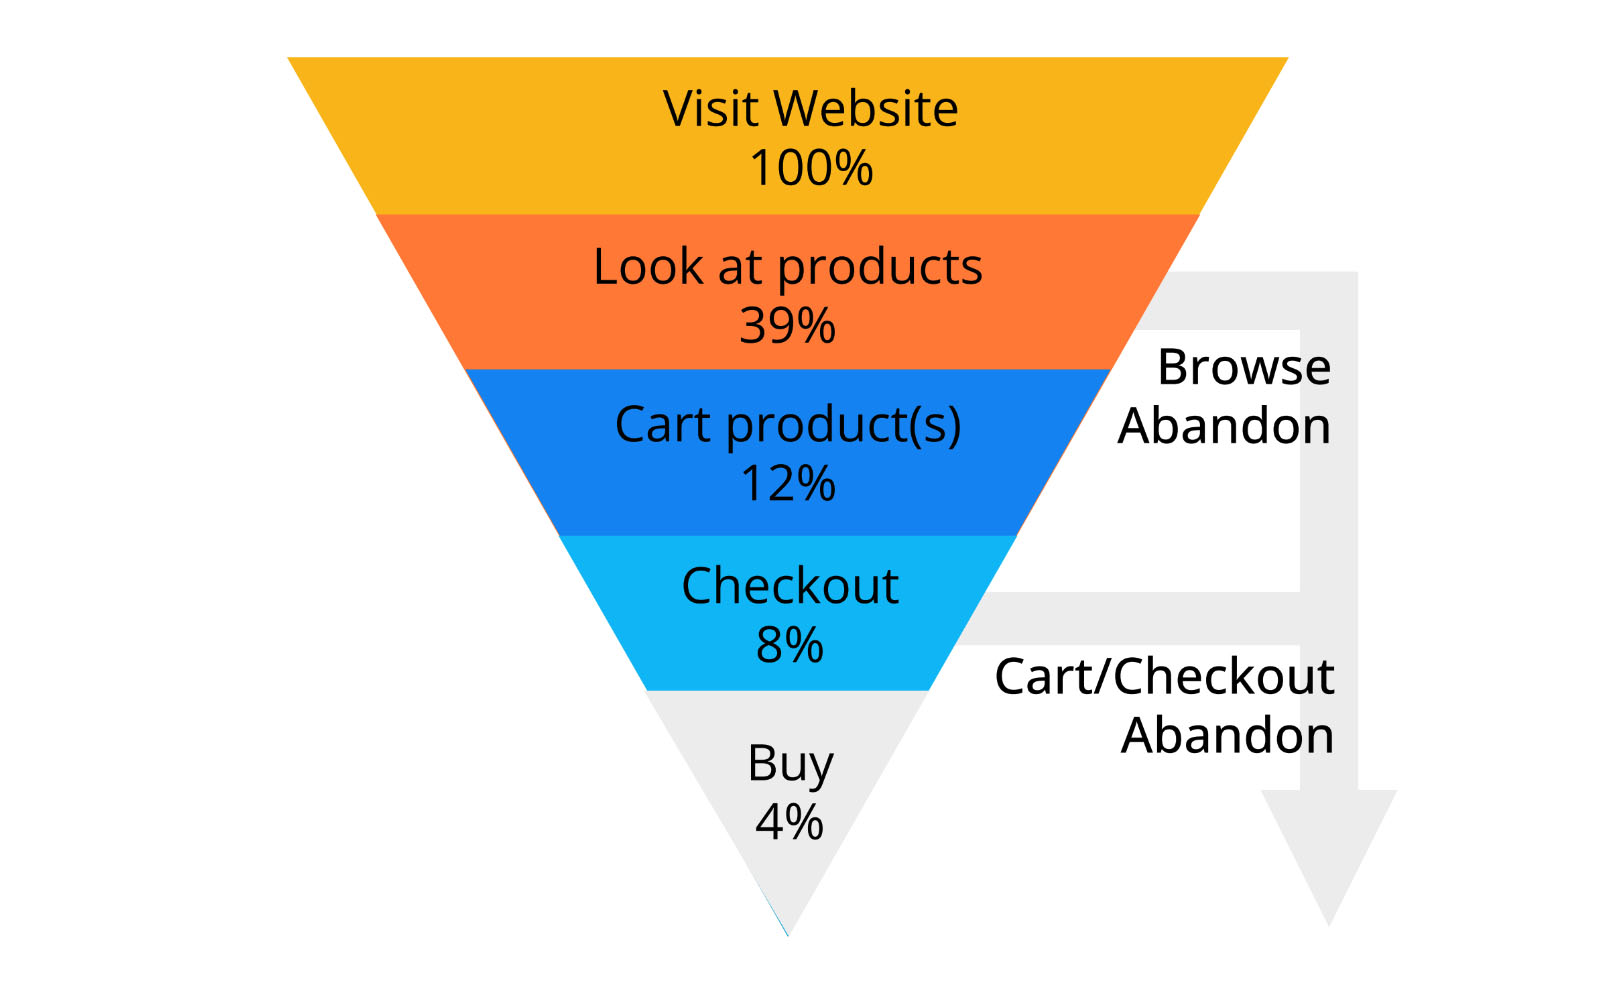 Customer Purchasing Funnel for Retail - Browse and Cart Abandonment